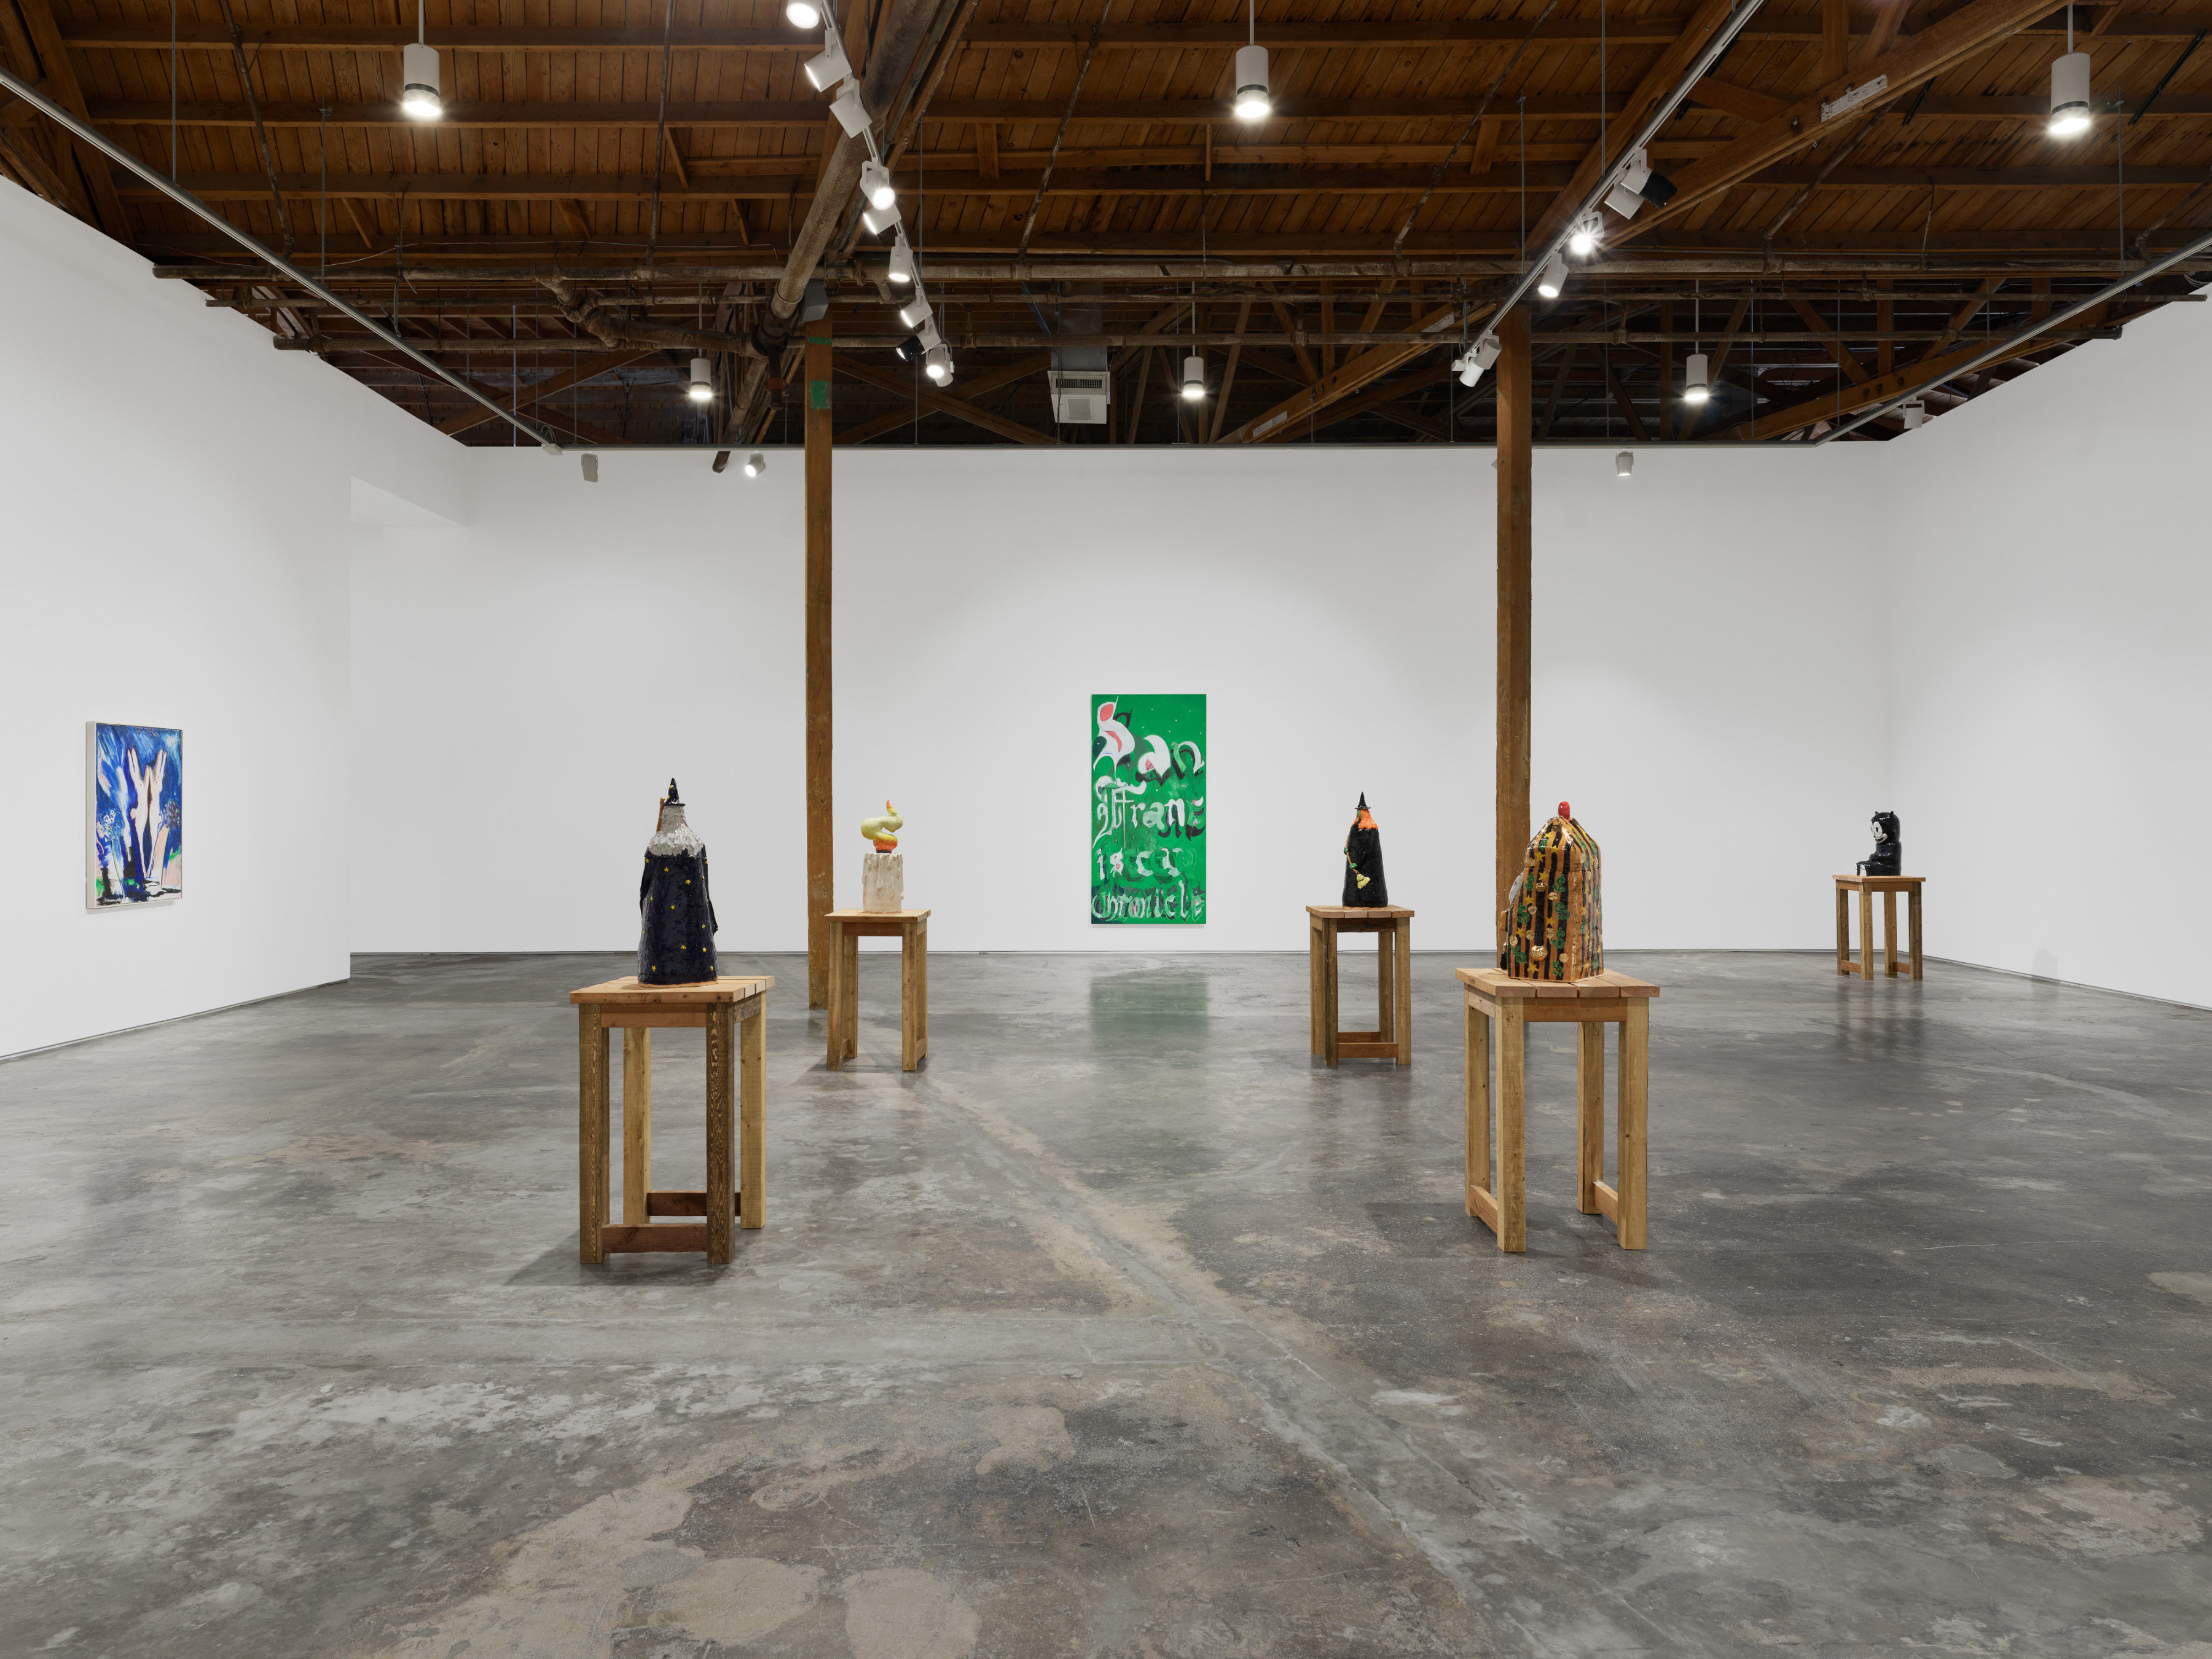 Installation view of "American Gothic”